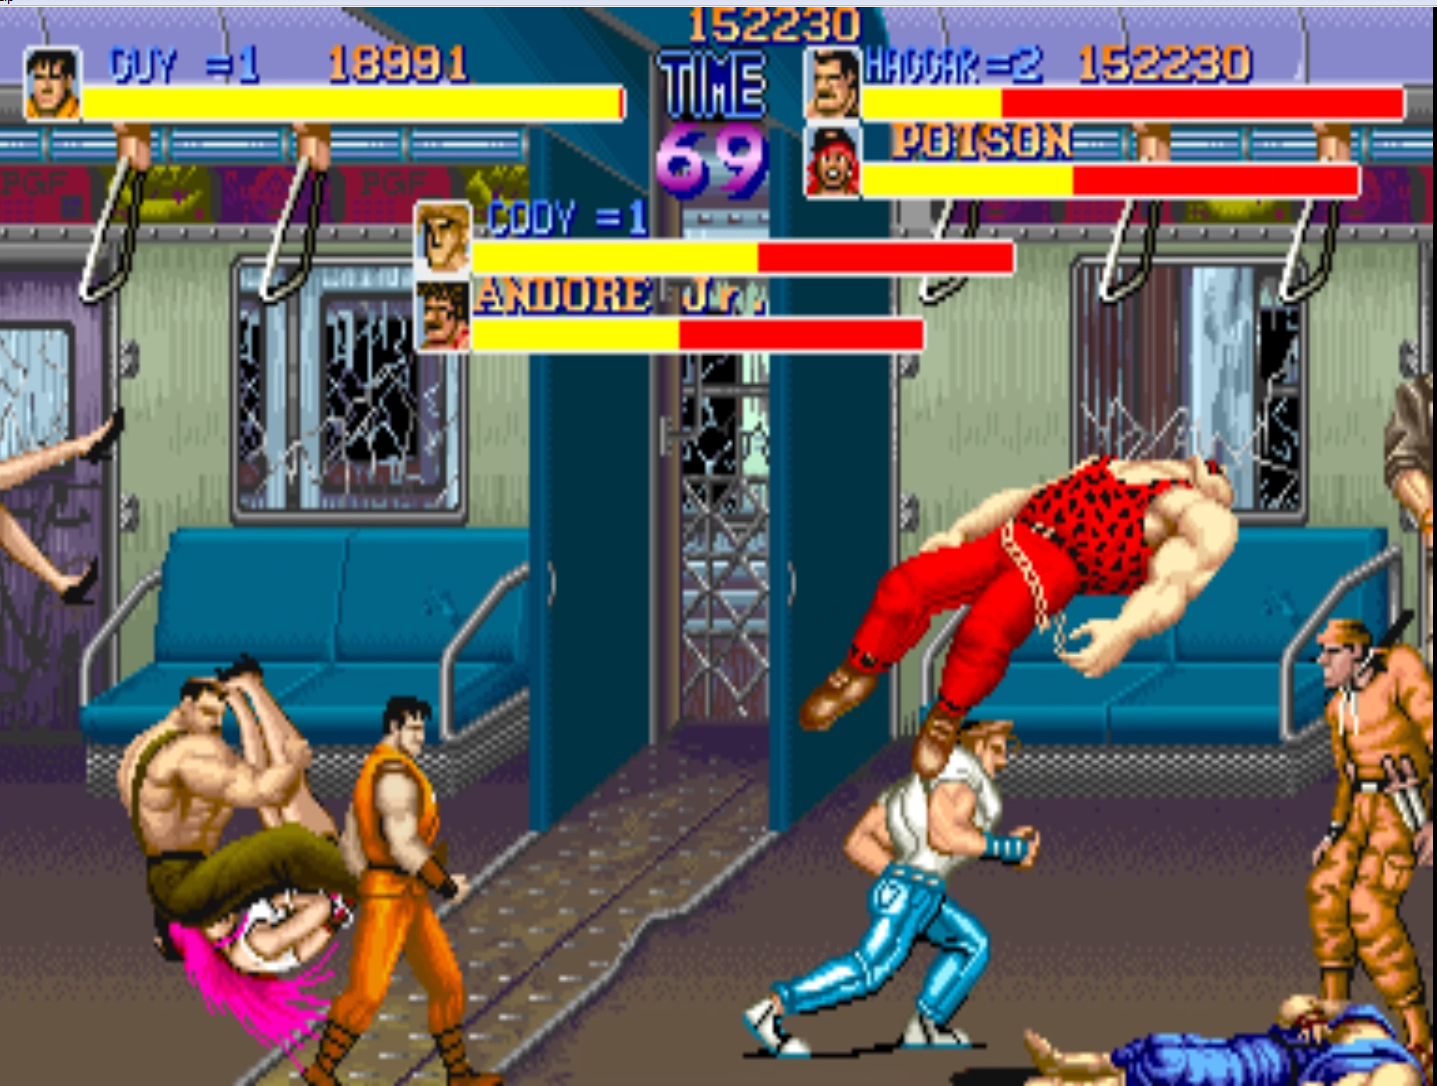 Final Fight 30th Anniversary brings 3-Player Mode to Real Arcade Hardware